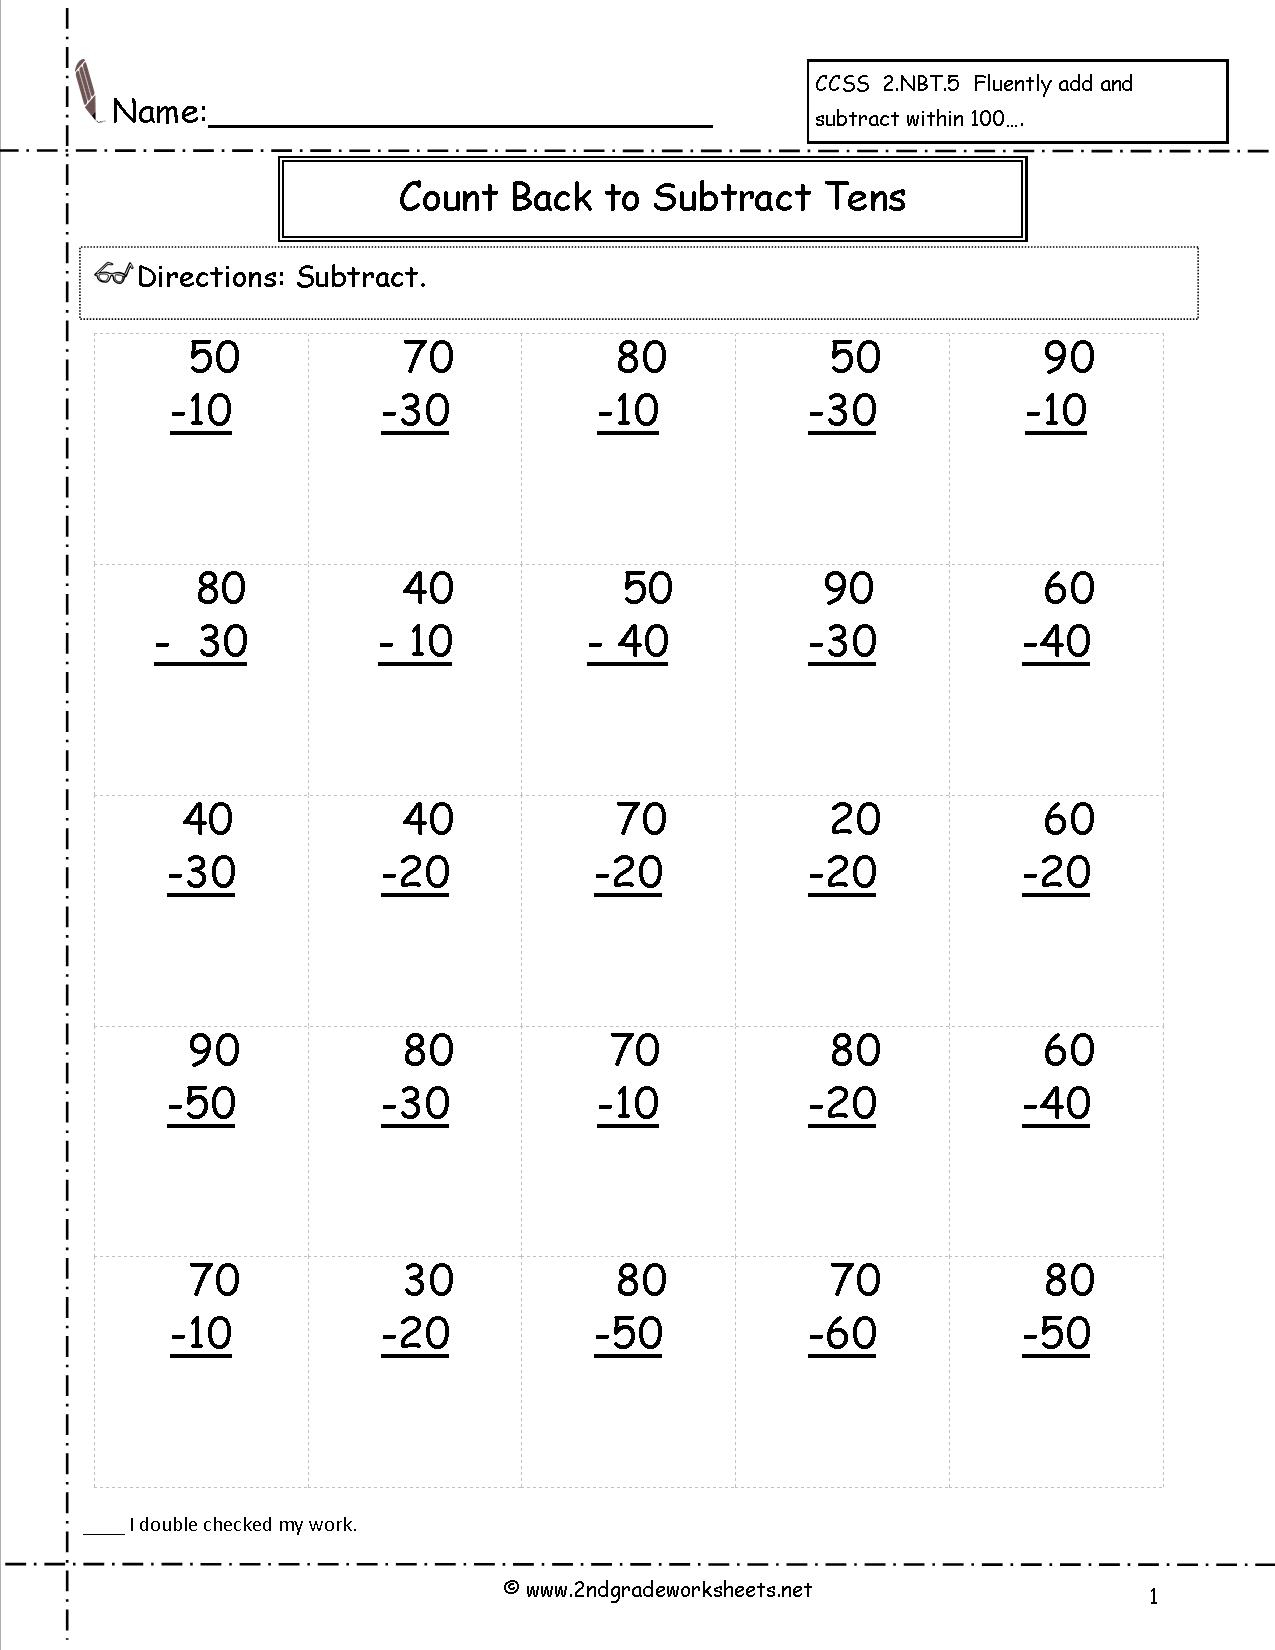 Two Digit Subtraction Worksheets | Printable Subtraction Worksheets With Borrowing